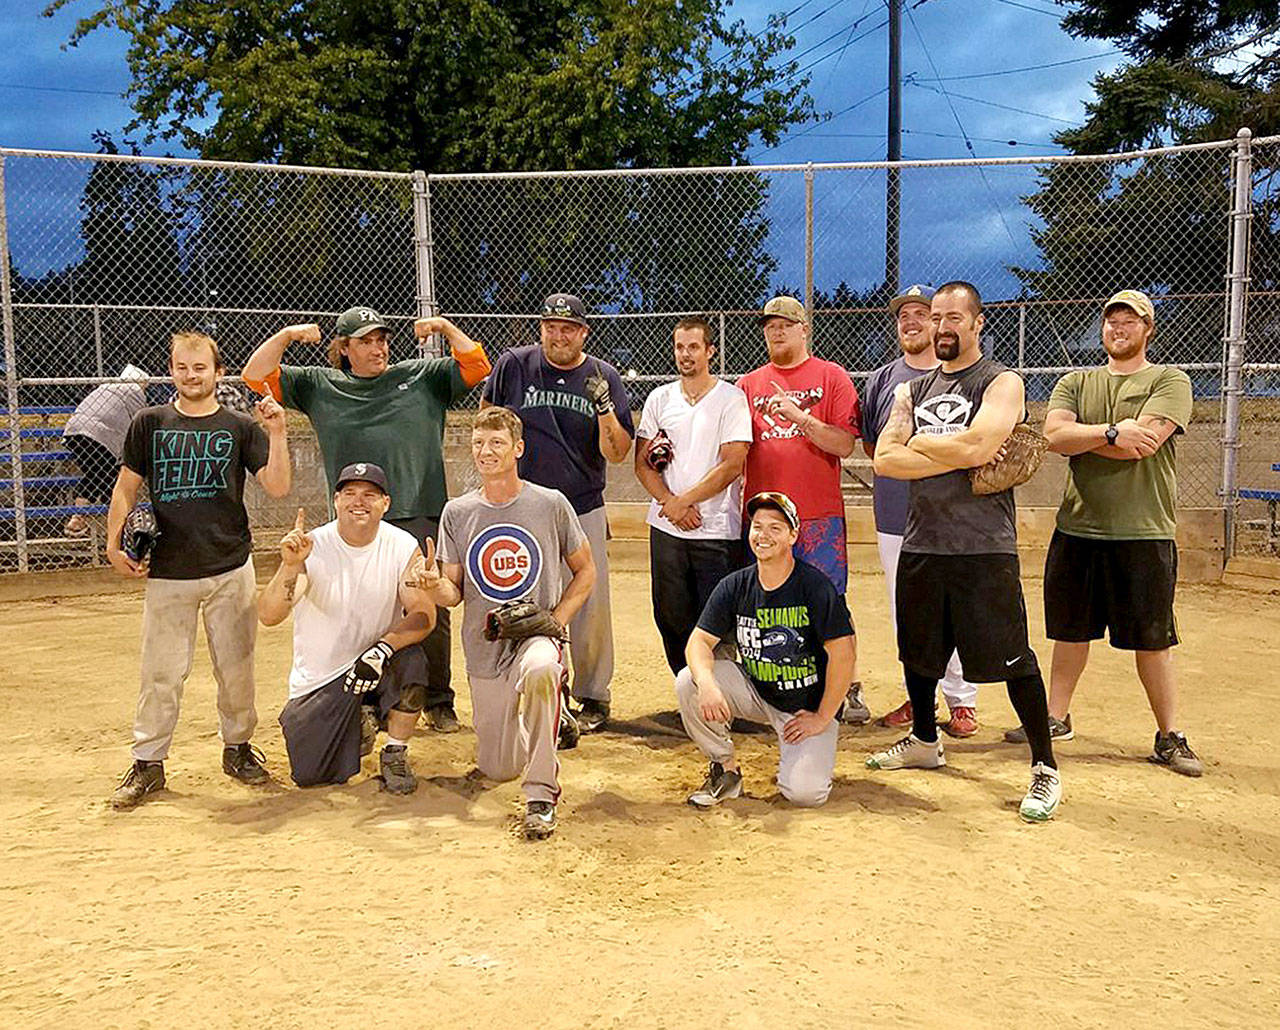 Kaboom Salon beat Evergreen Collision 7-6 in the Men’s Silver Division of the Port Angeles Parks and Rec softball tournament.